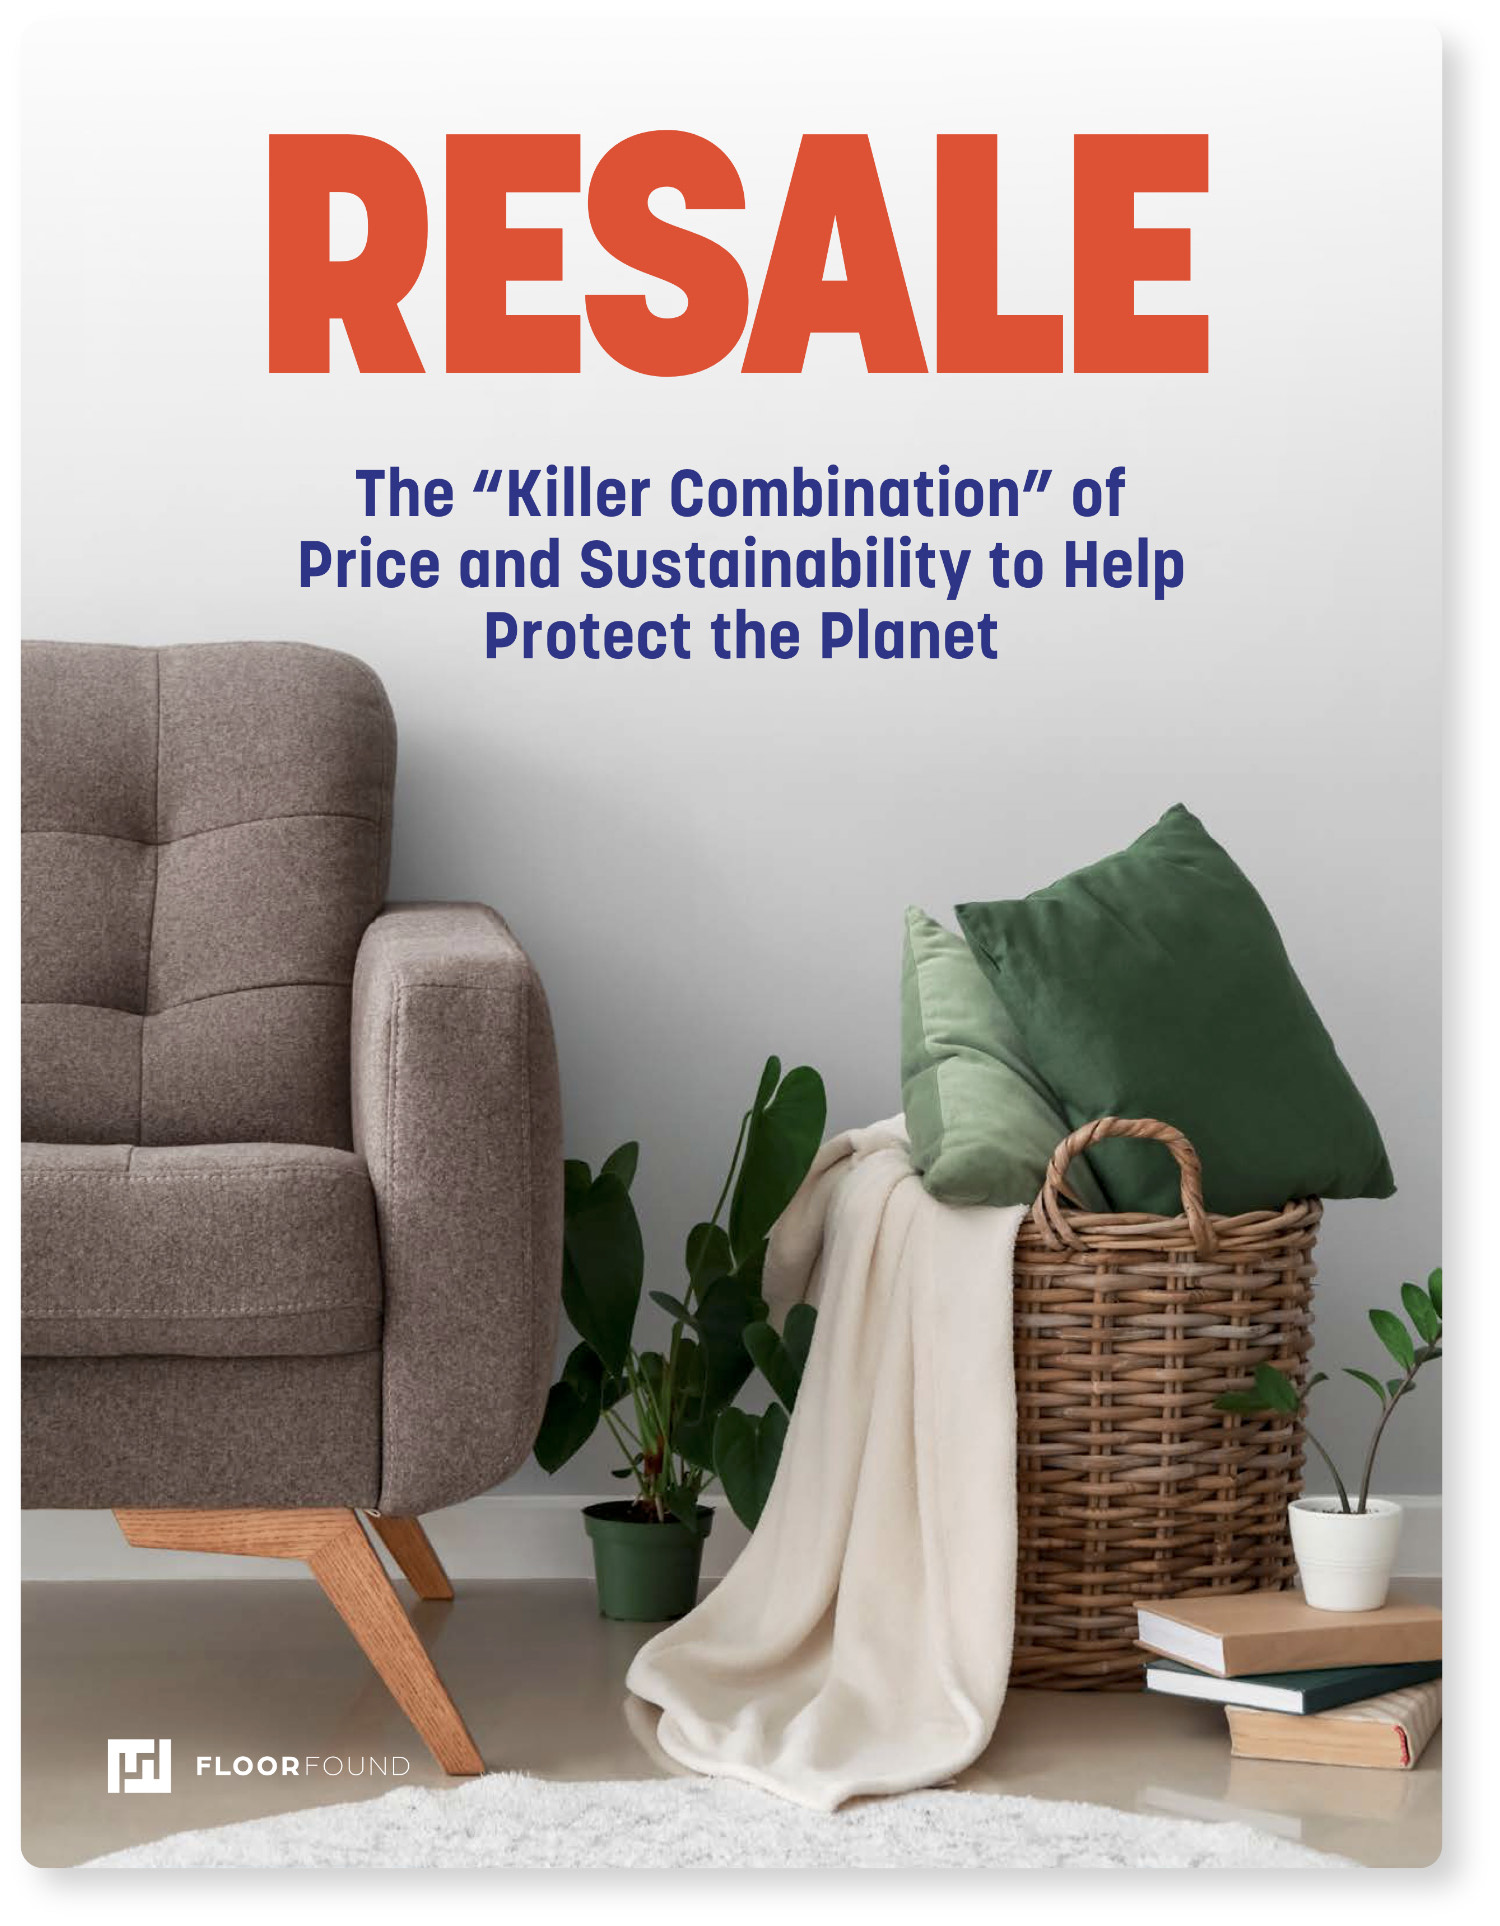 FloorFound | Resale: The “Killer Combination” of Price and Sustainability to Help Protect the Planet